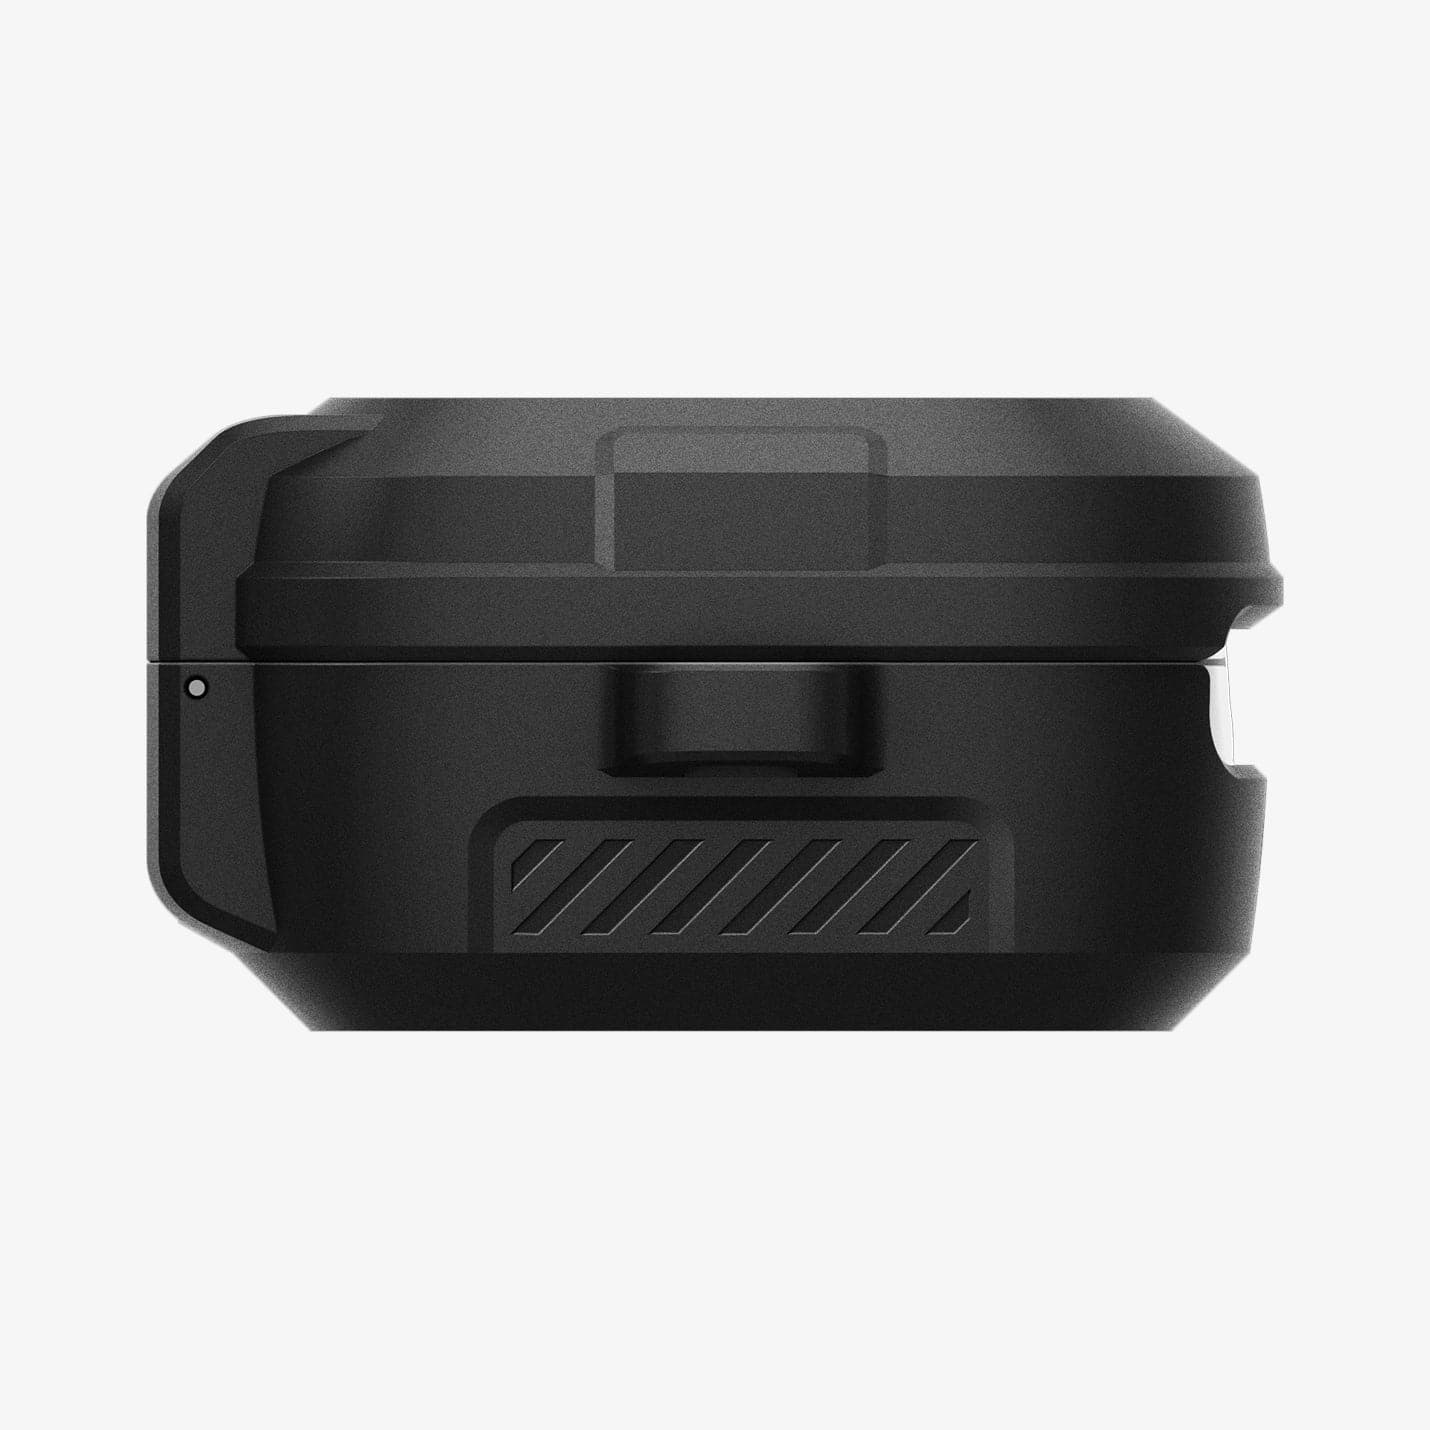 ACS05264 - Galaxy Buds 2 Pro / 2 / Pro / Live Case Lock Fit in matte black showing the side